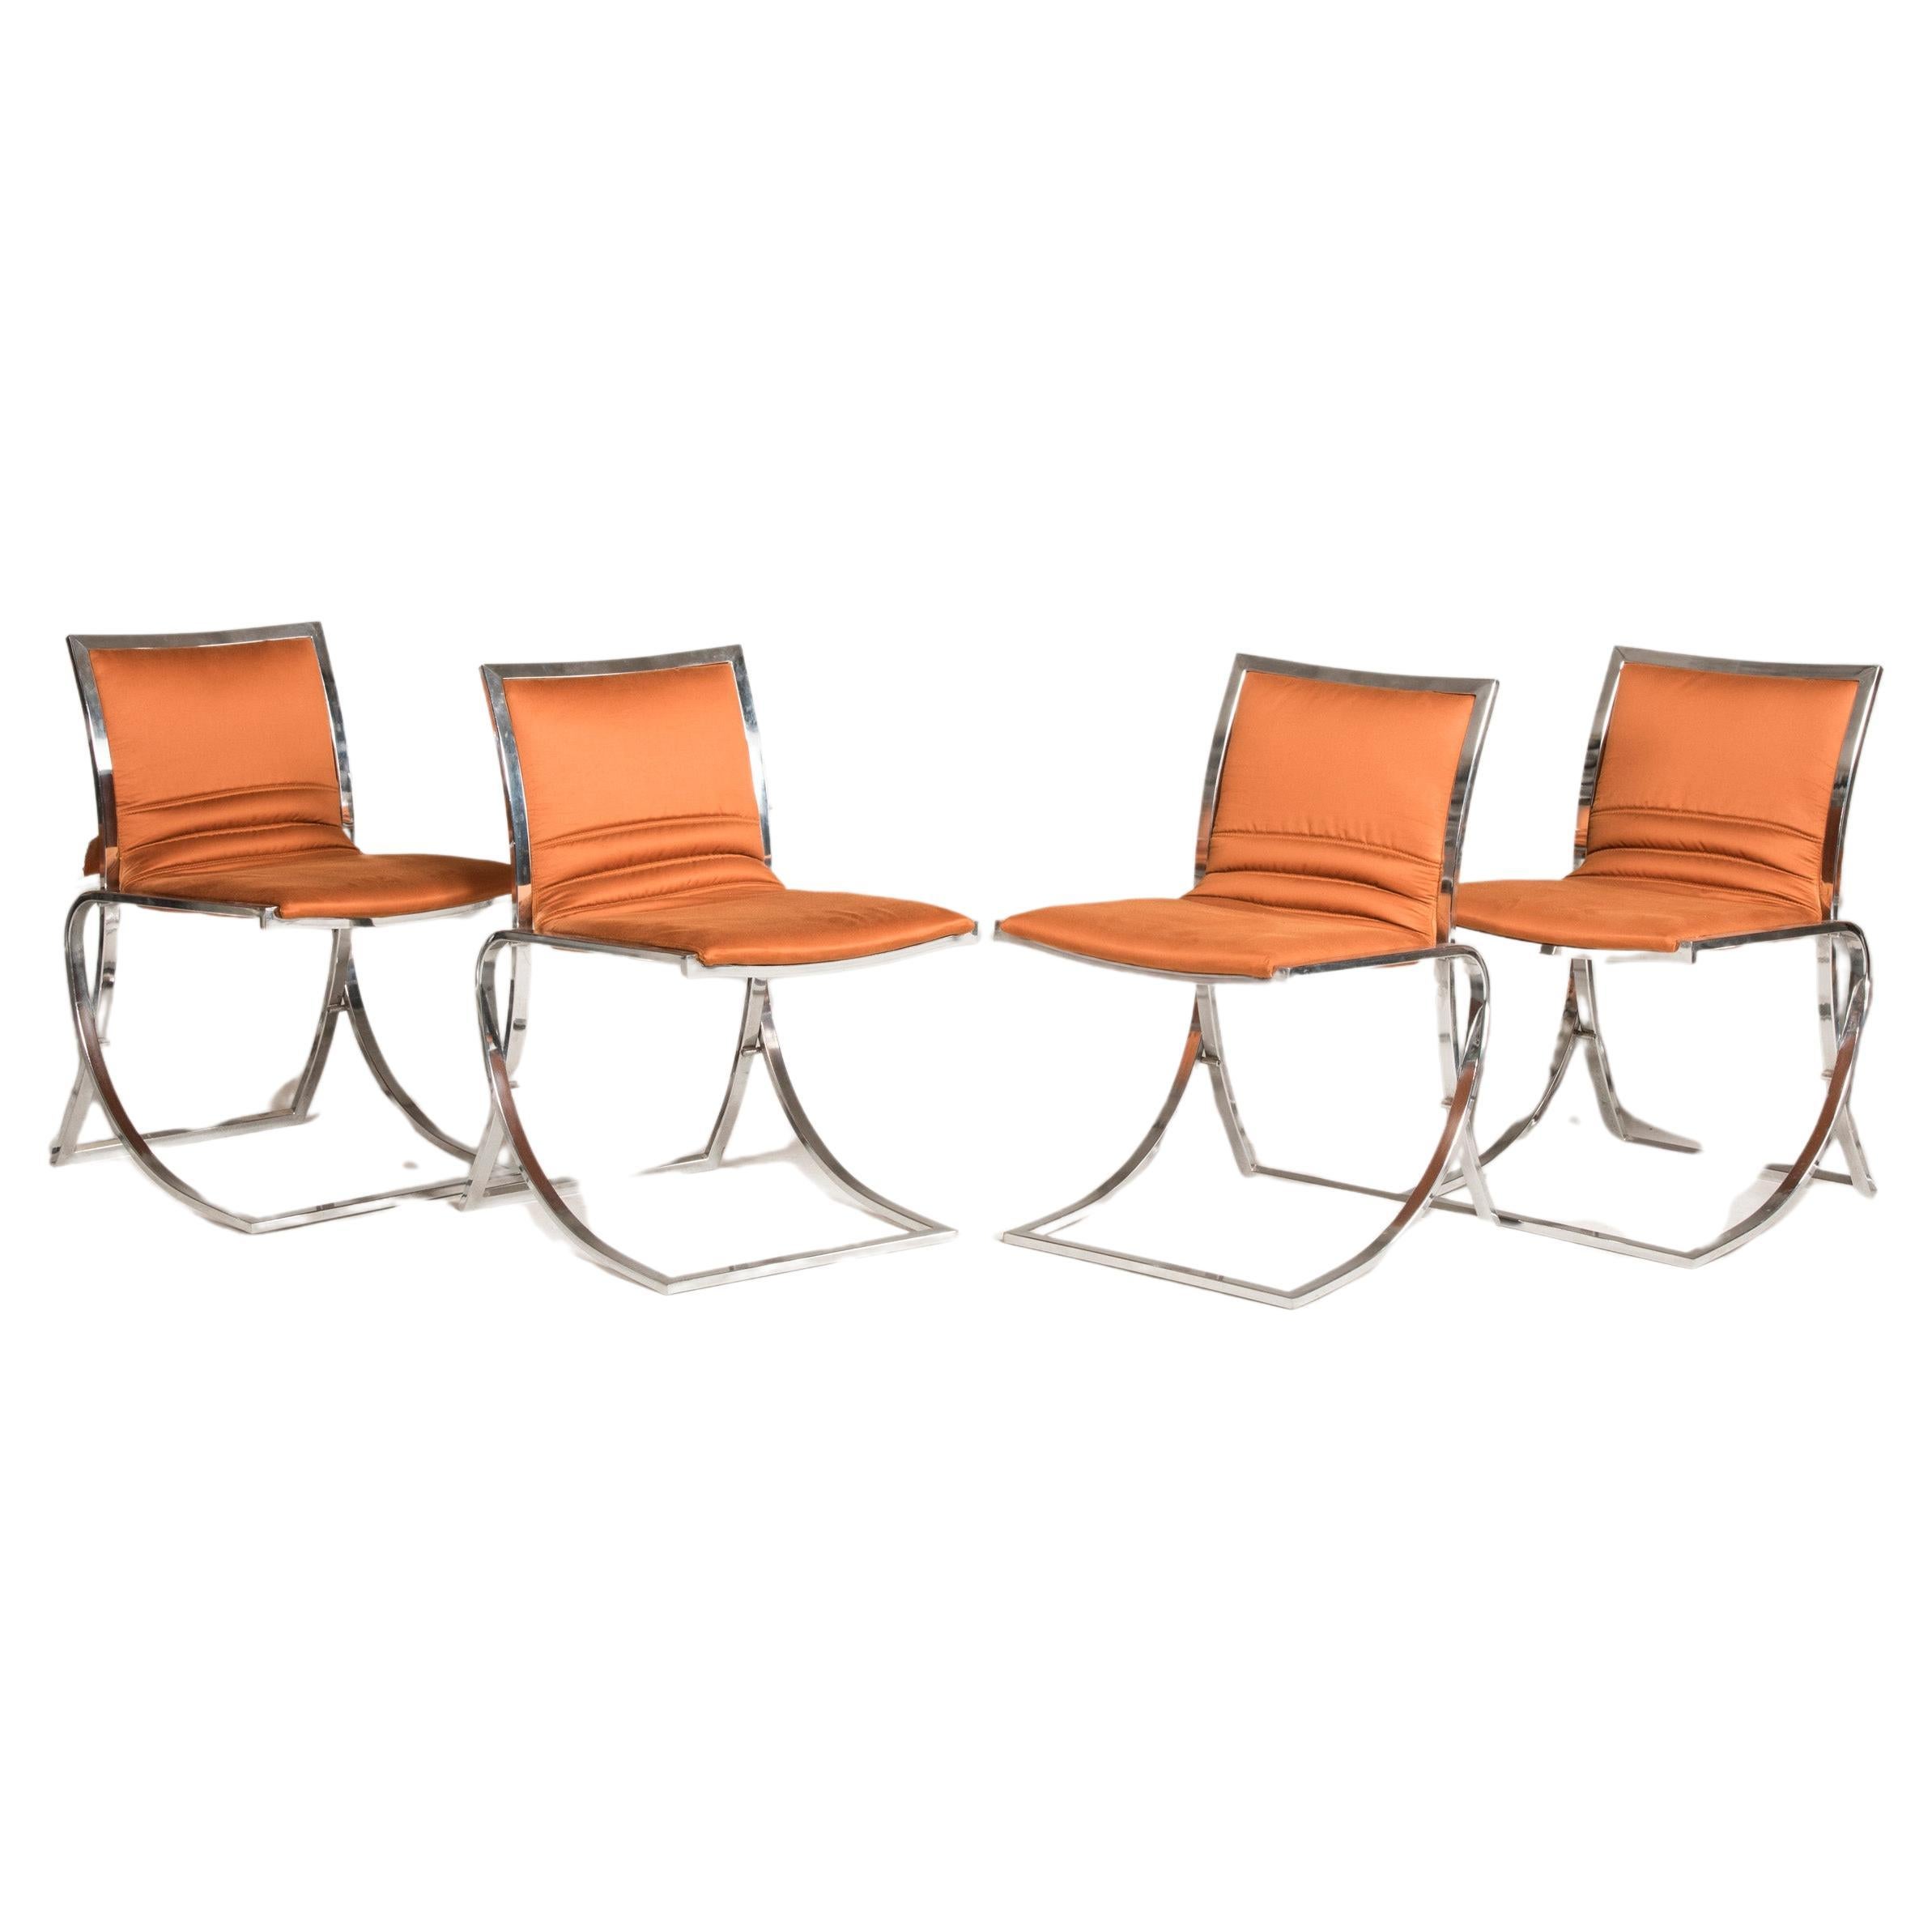 1970s Orange Upholstery Chromed Steel Chairs Set of 4 For Sale